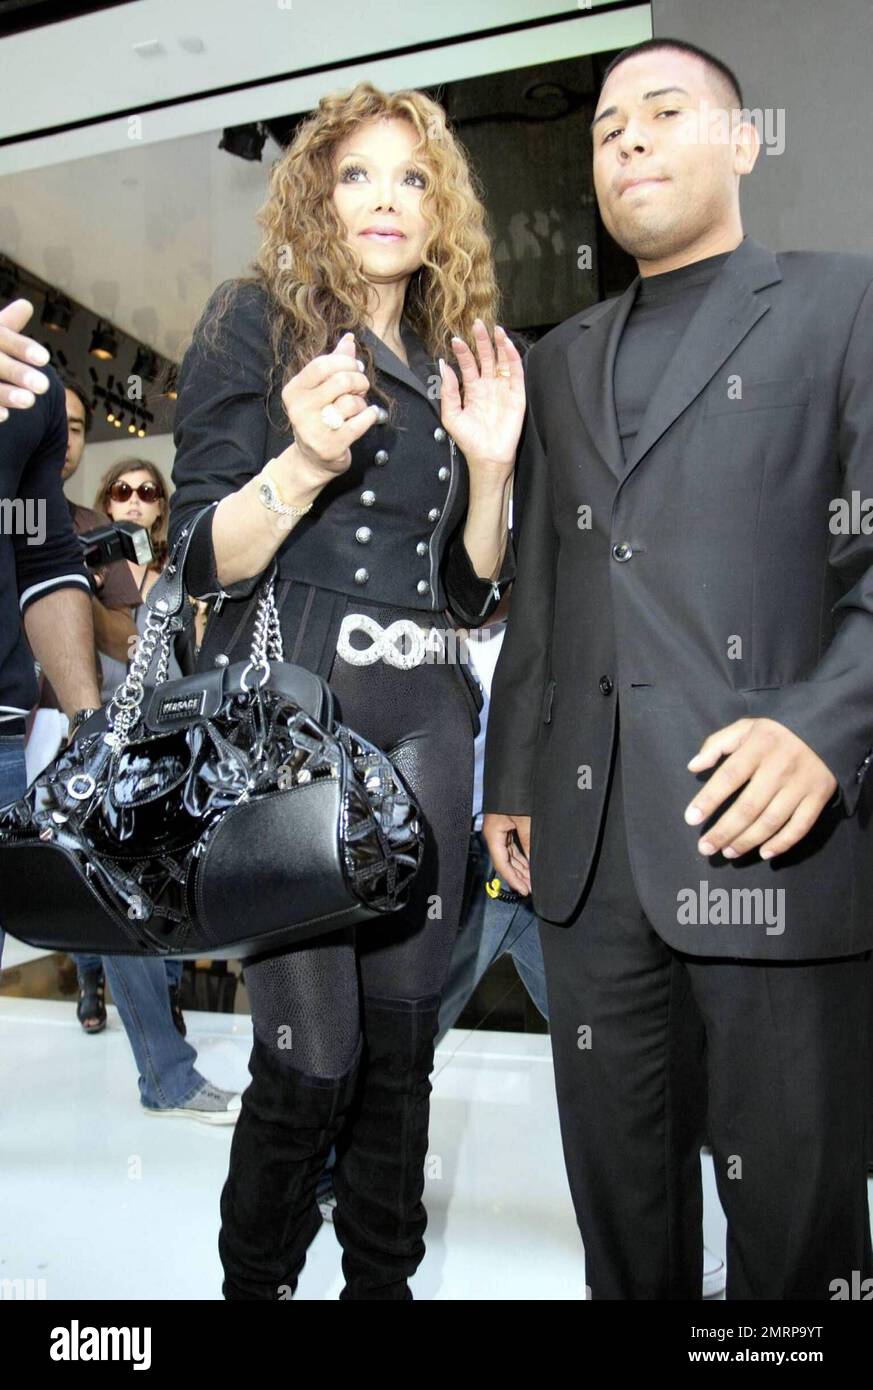 Latoya Jackson is protected by bodyguards as she leaves the Chanel store  after shopping on Robertson Blvd in Los Angeles, CA. 8/17/09 Stock Photo -  Alamy